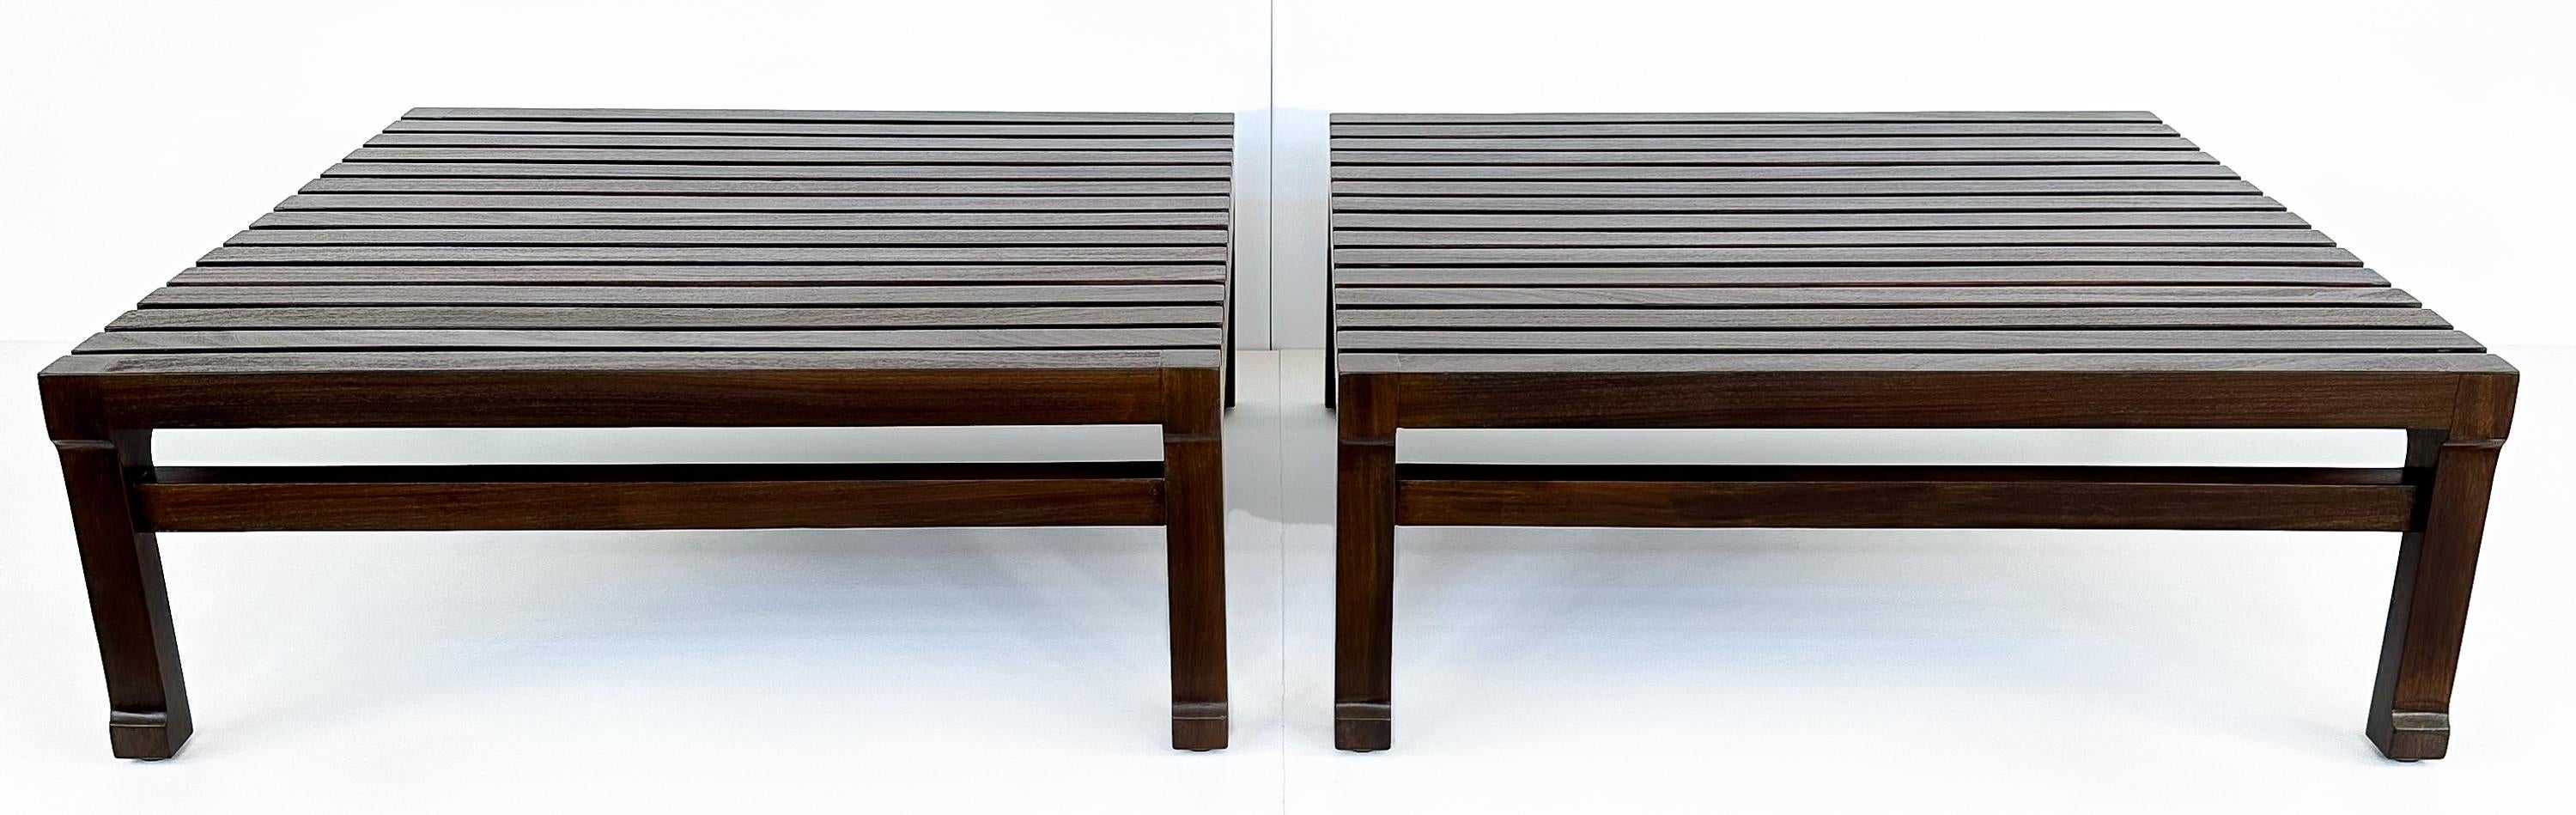 Stained Pair of Italian Low Slatted End Tables or Coffee Tables